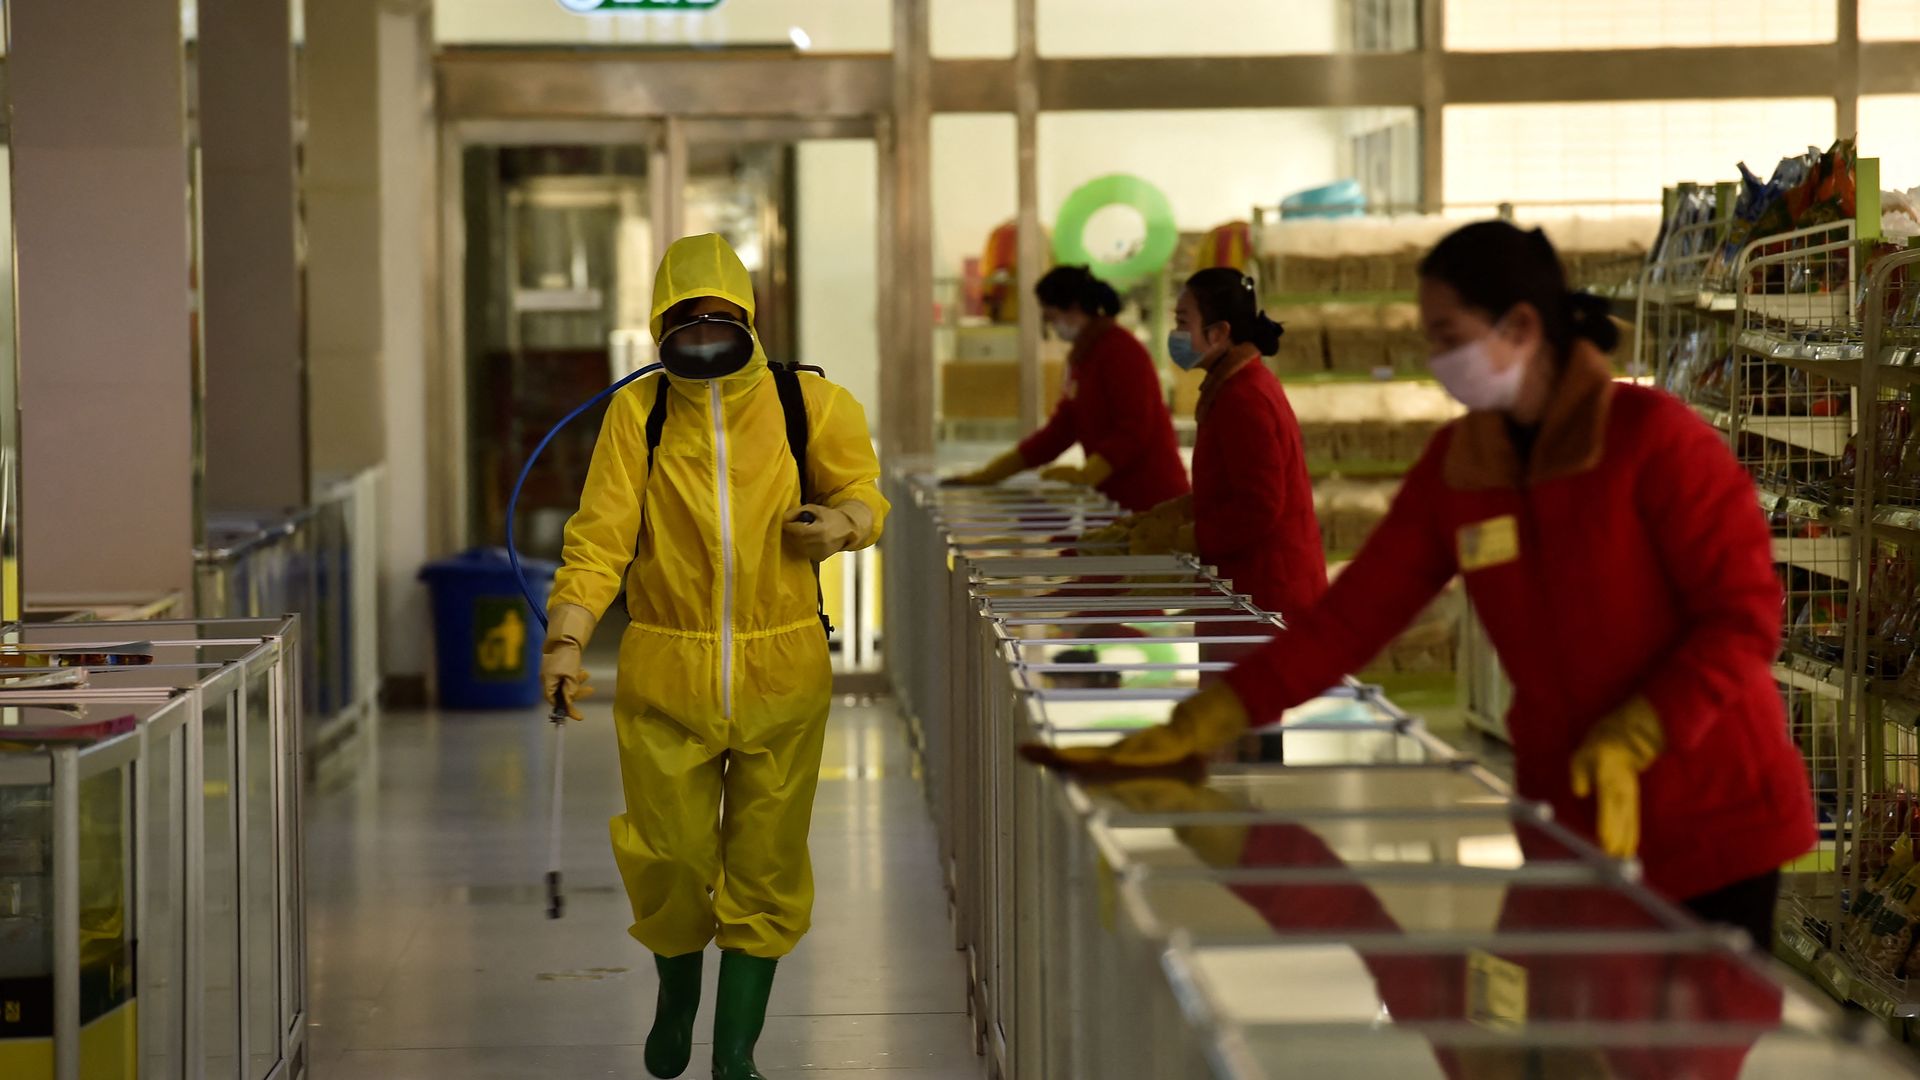 Photo of a person in a yellow hazmat suit walking by a row of counters where people are wiping down surfaces